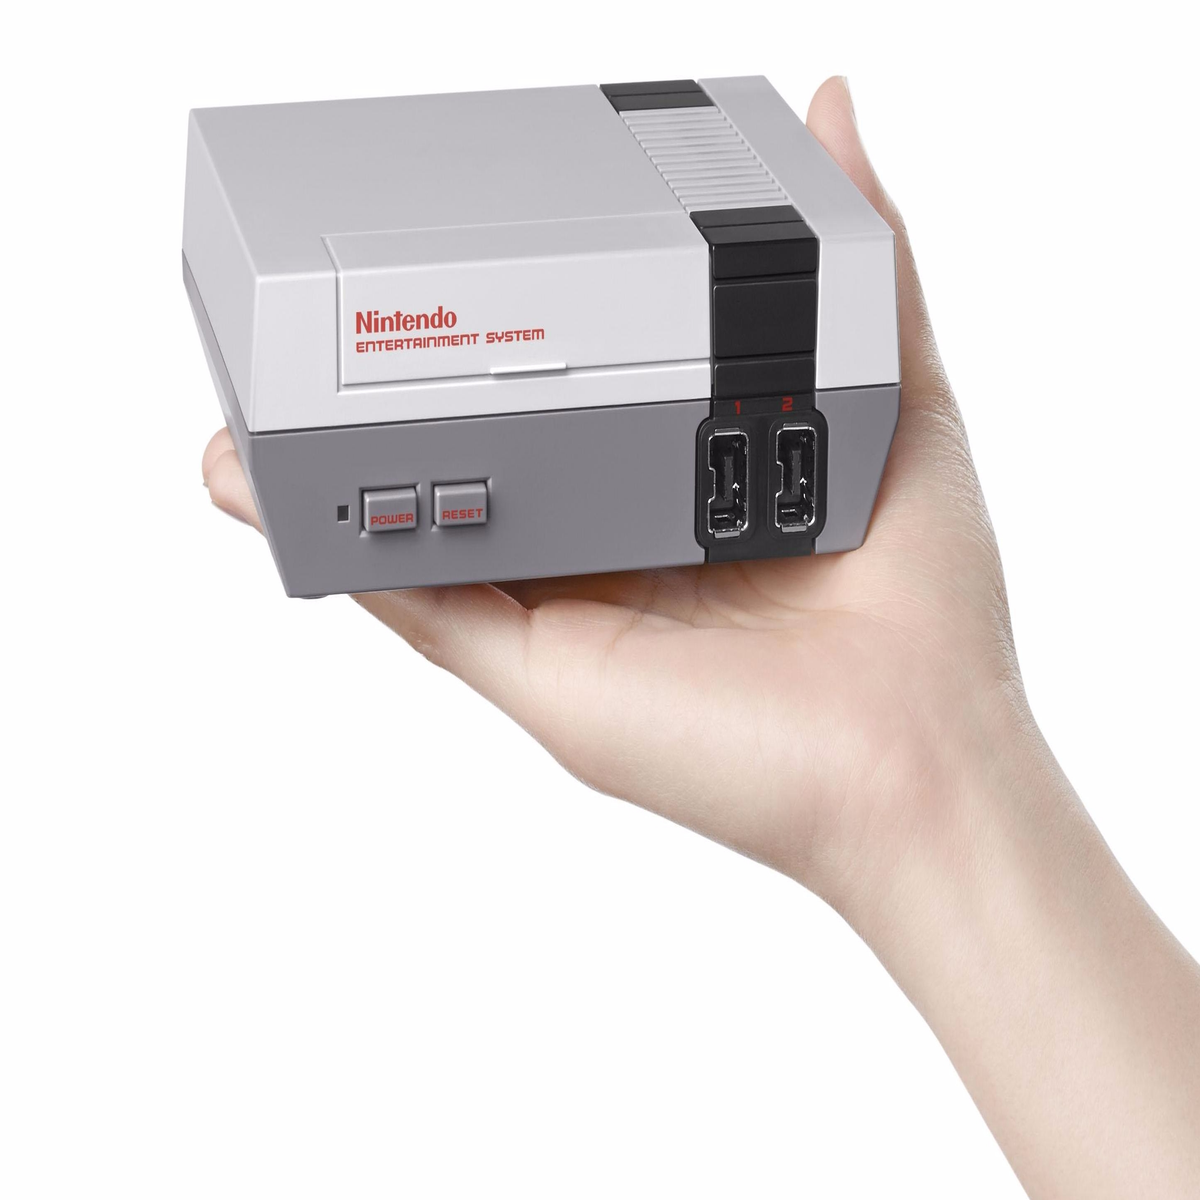 Nintendo had a surprise Direct Mini today, here's what you missed